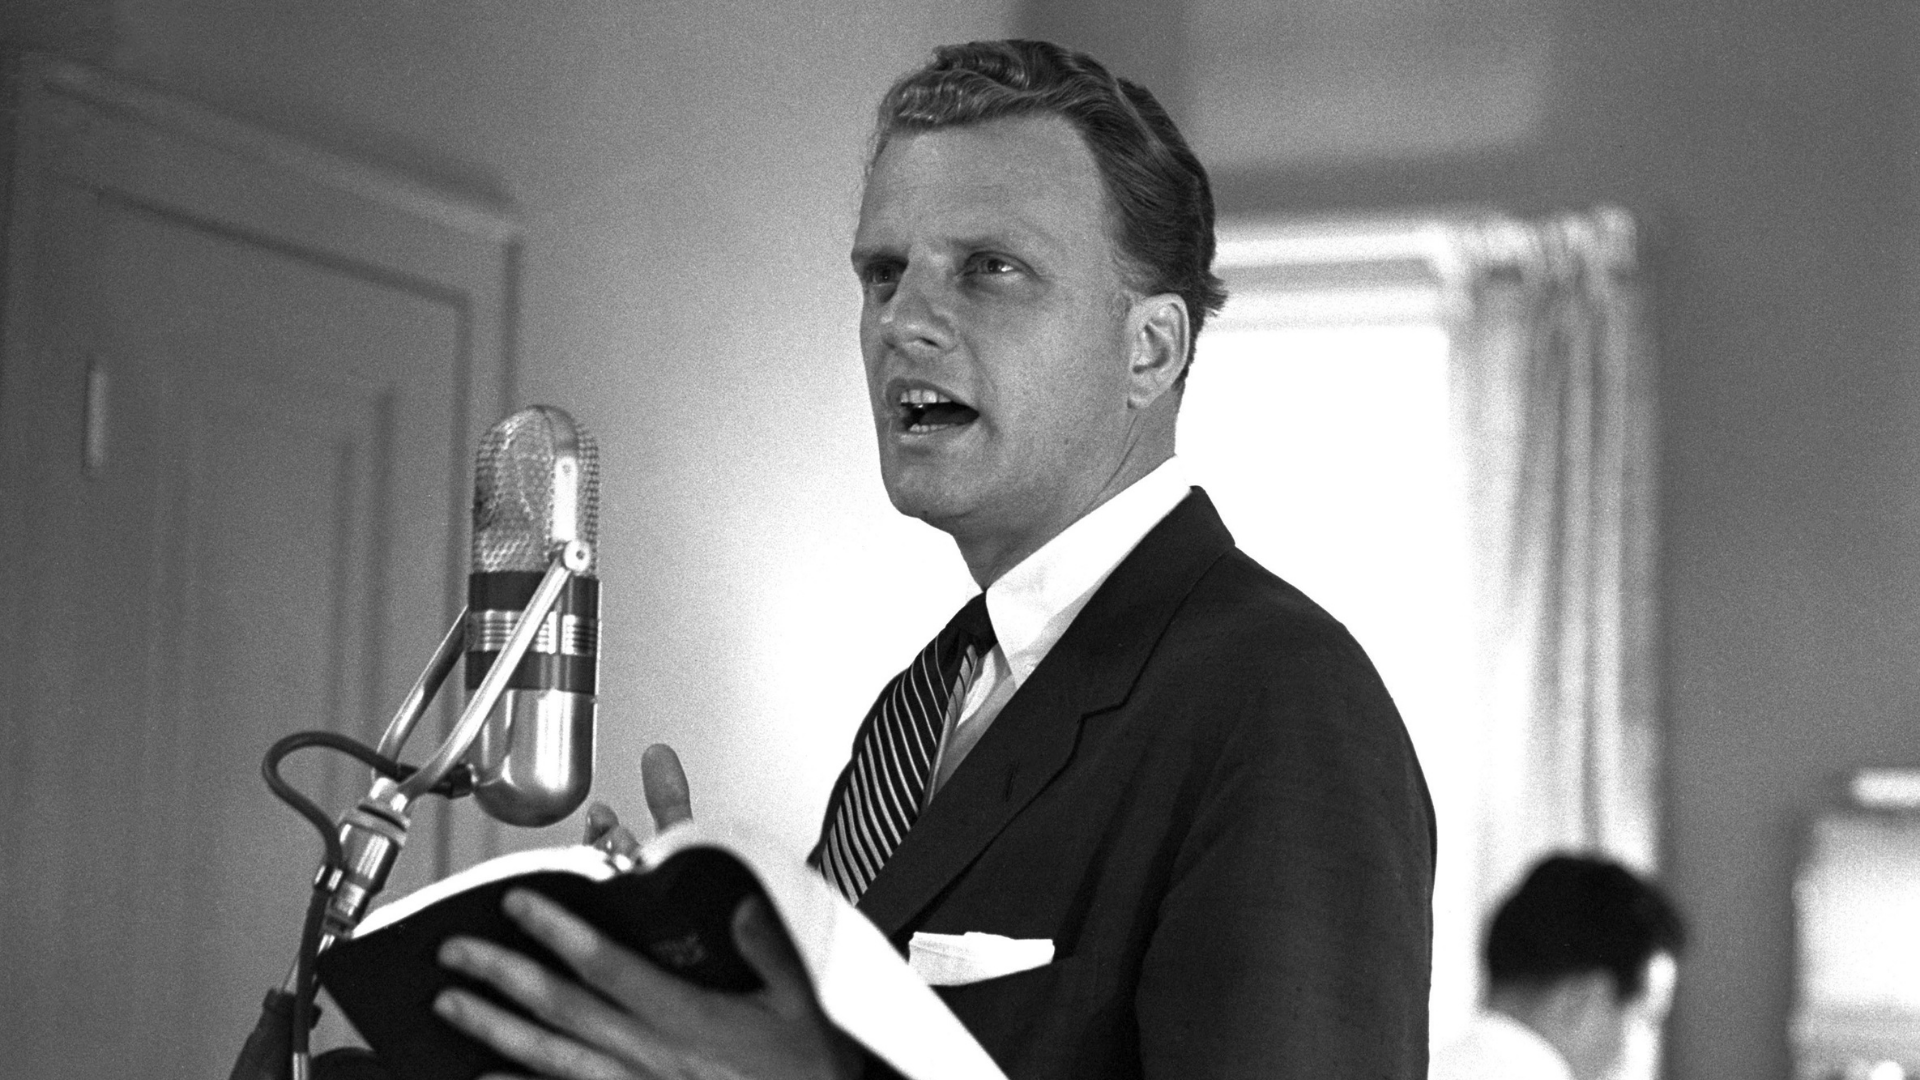 The Life and Times of Religious Leader, Billy Graham